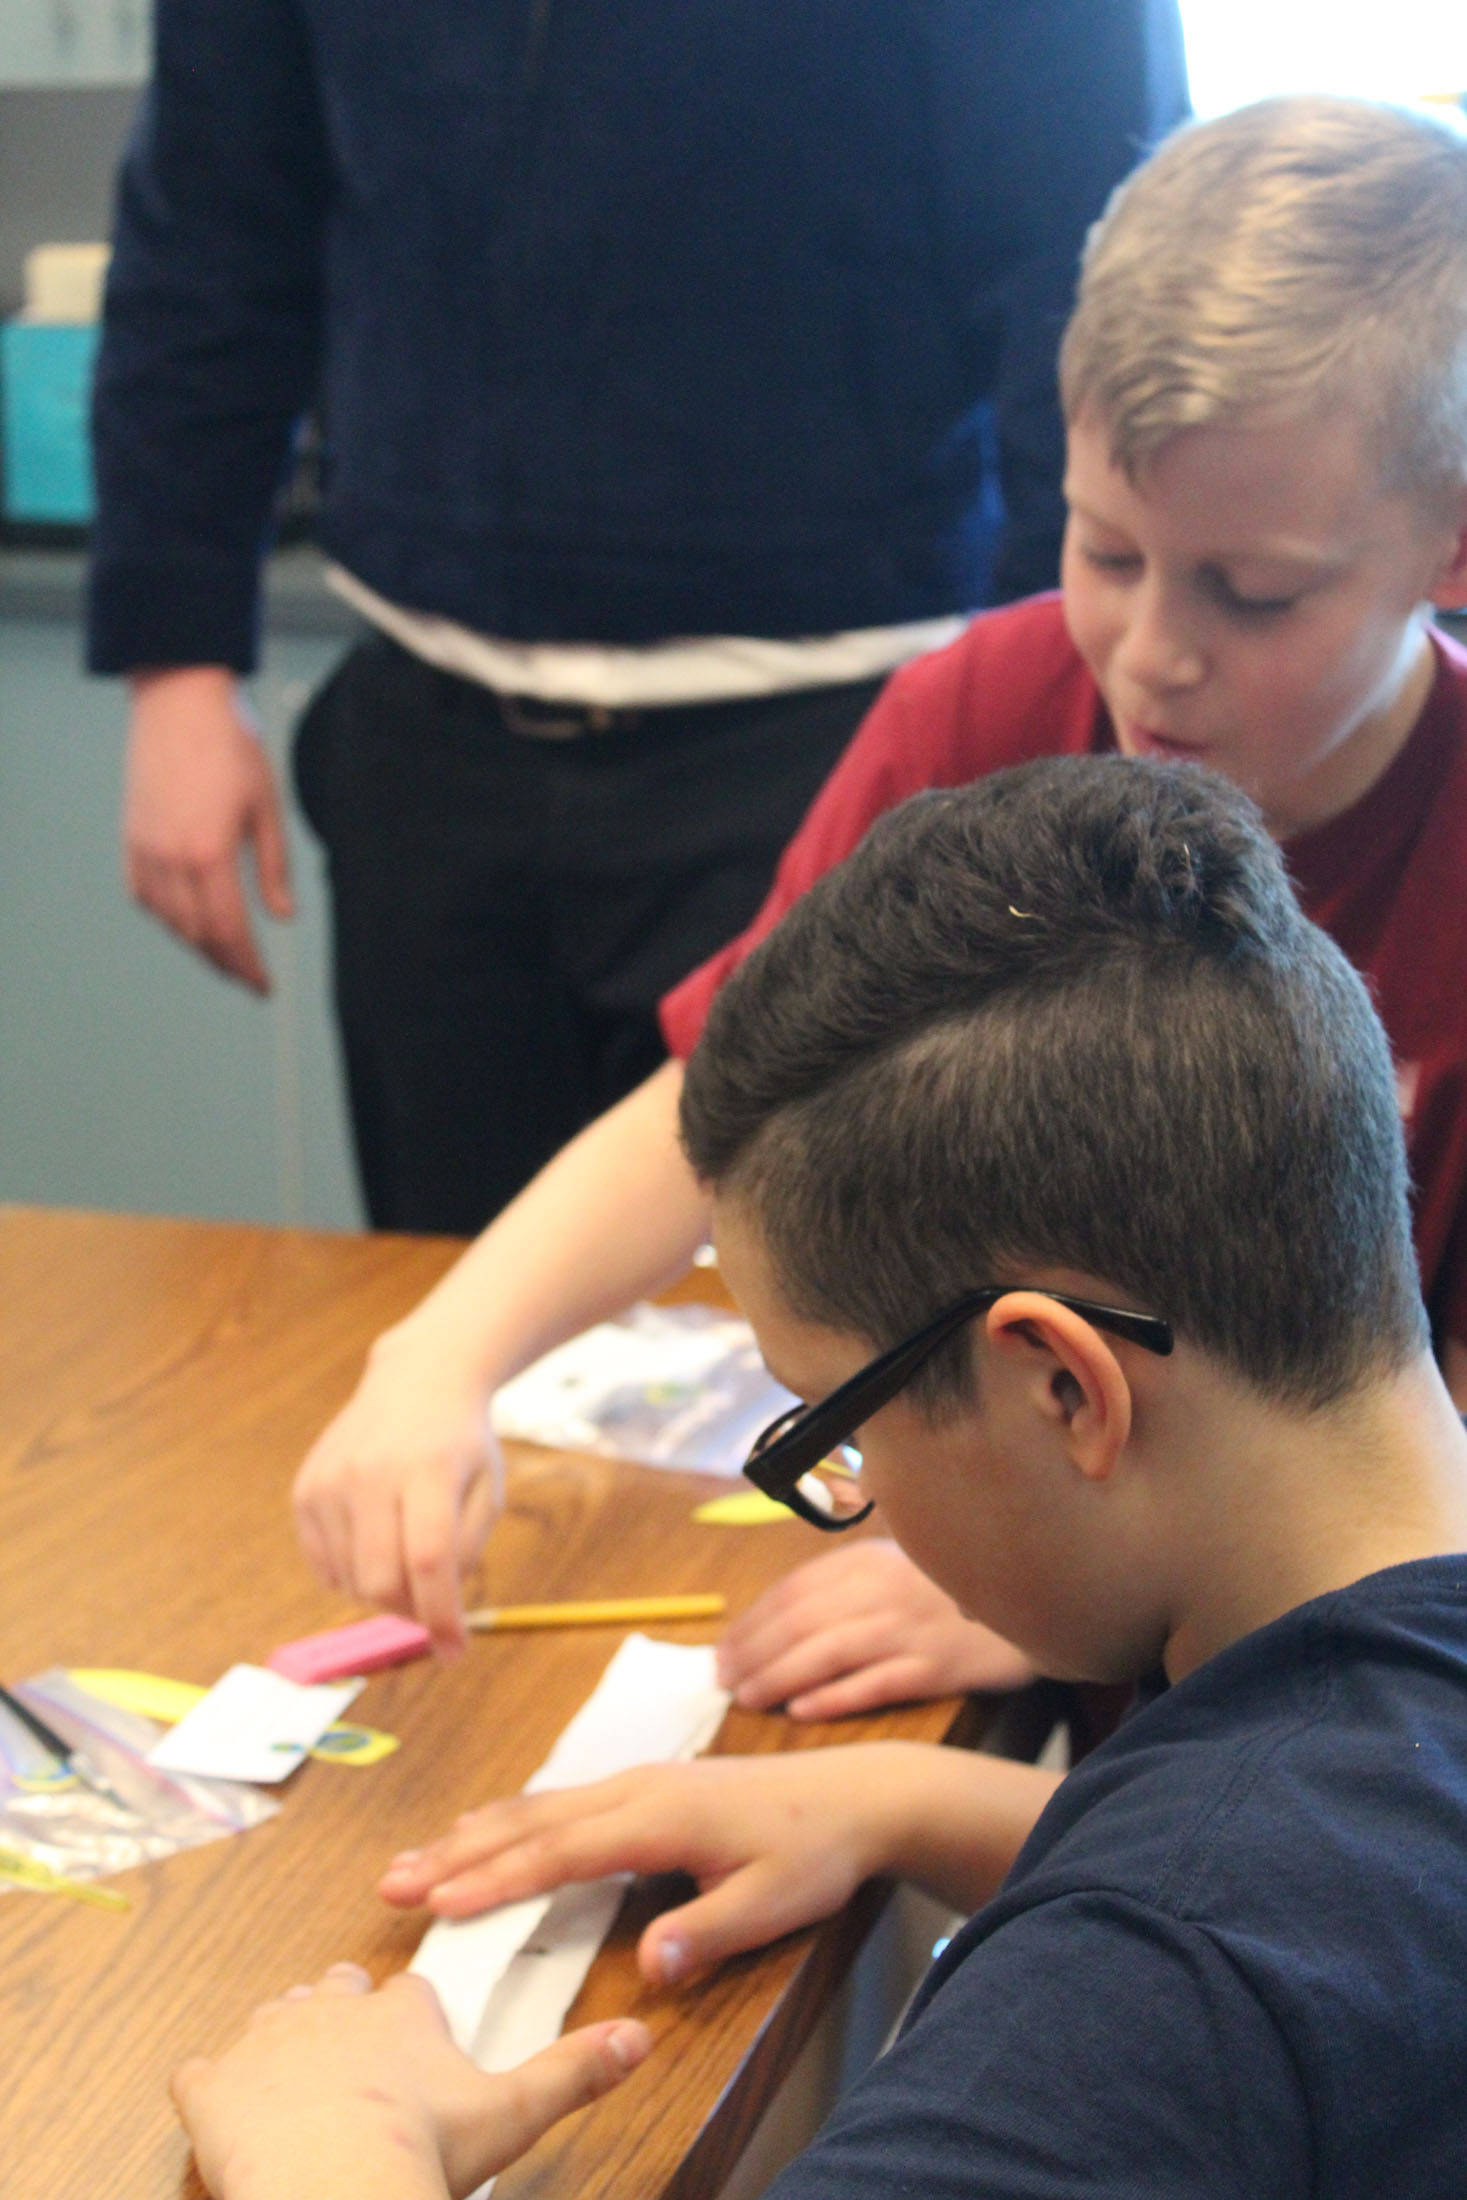 Fourth grader Kannon Hughes, background, helps sixth grader Ceiony Allen fold his seed tape, or a method of readying and storing seeds for later planting, on Tuesday, May 1, 2018 at Ninilchik School in Ninilchik, Alaska. Members of the Ninilchik chapter of the National FFA Organization visited the school to host educational sessions for Alaska Agriculture Day. (Photo by Megan Pacer/Homer News)